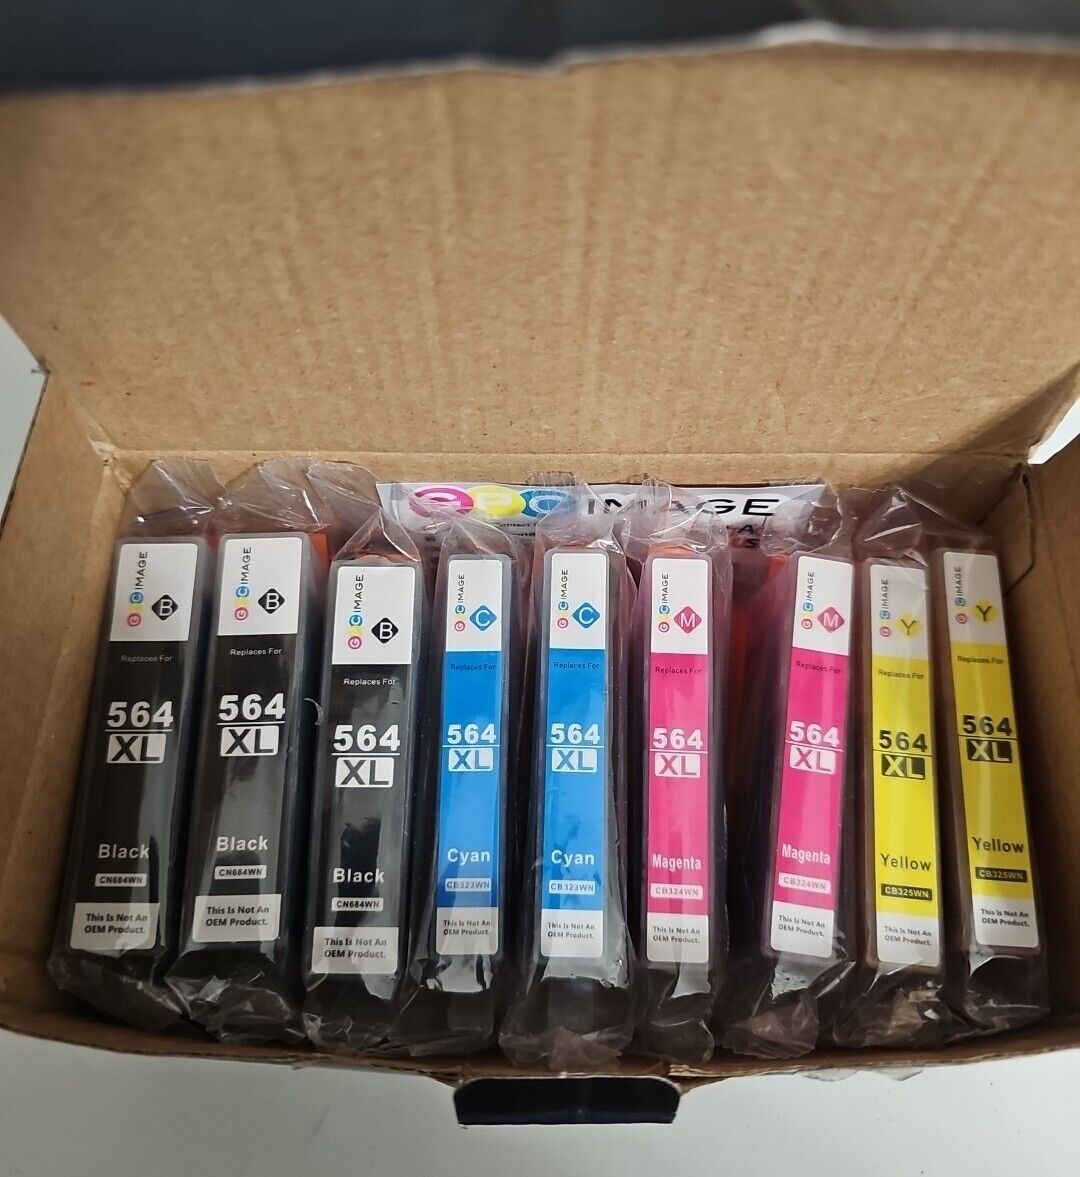 GPC Image Compatible Ink Cartridge's 564 XL Black/Cyan/Magenta/Yellow 9 Included